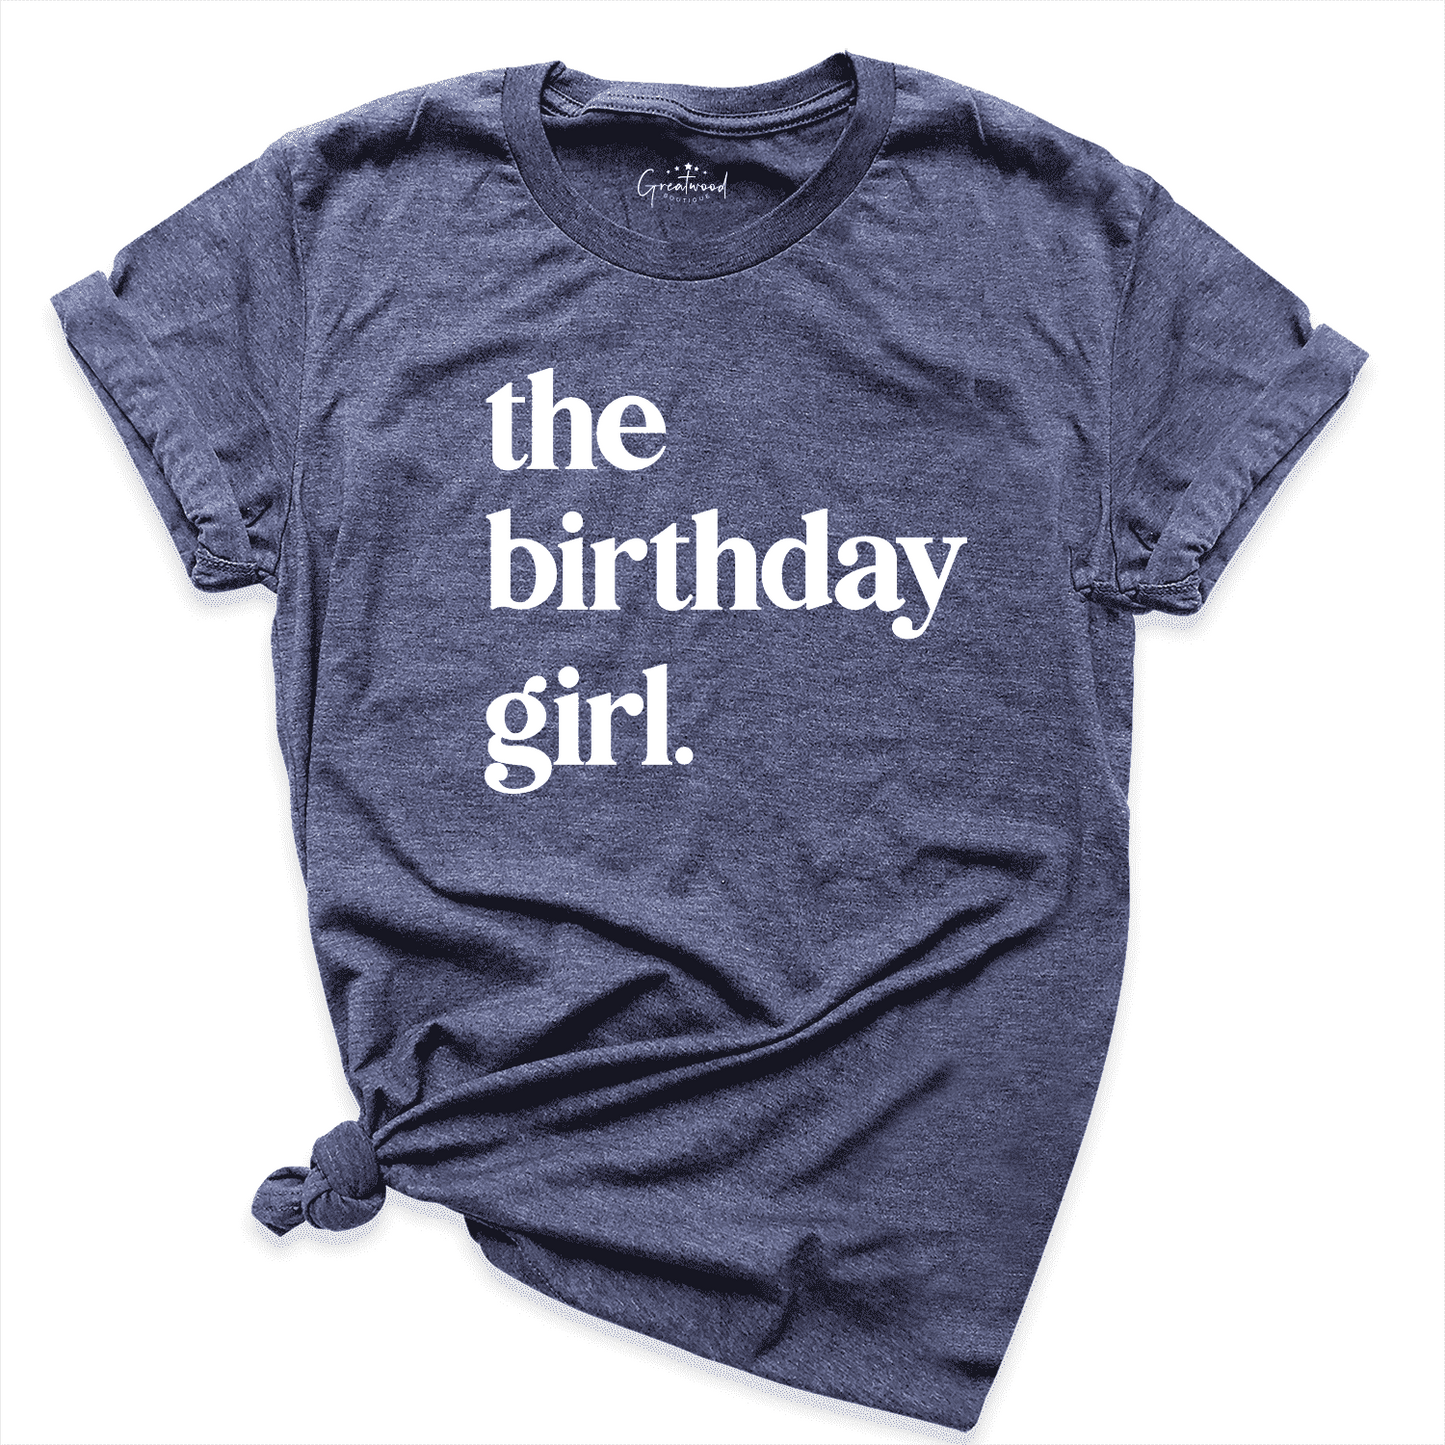 The Birthday Girl Shirt Navy - Greatwood Boutique